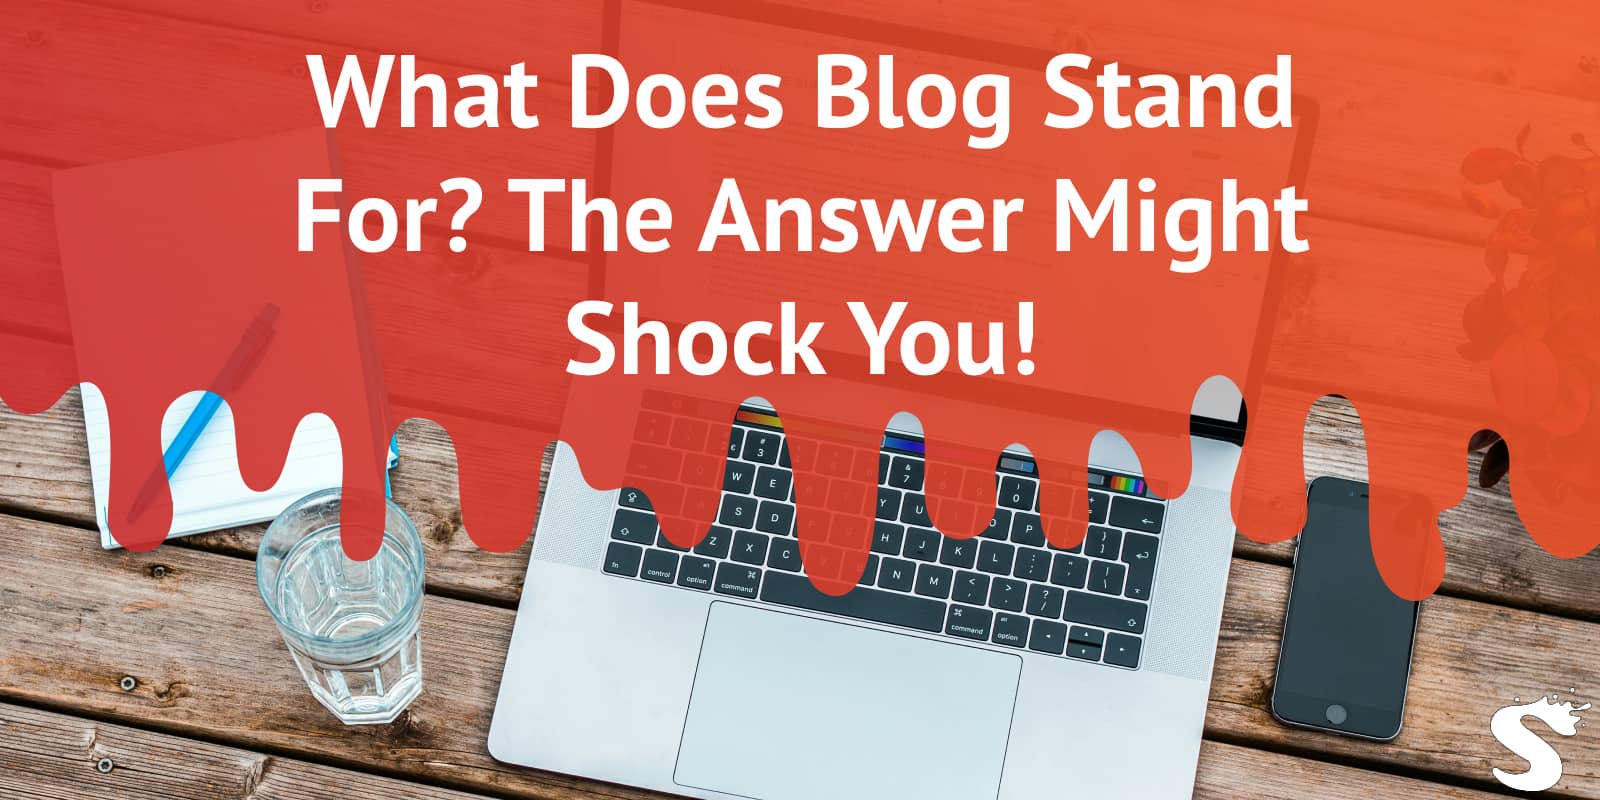 What Does Blog Stand For? The Answer Might Shock You!